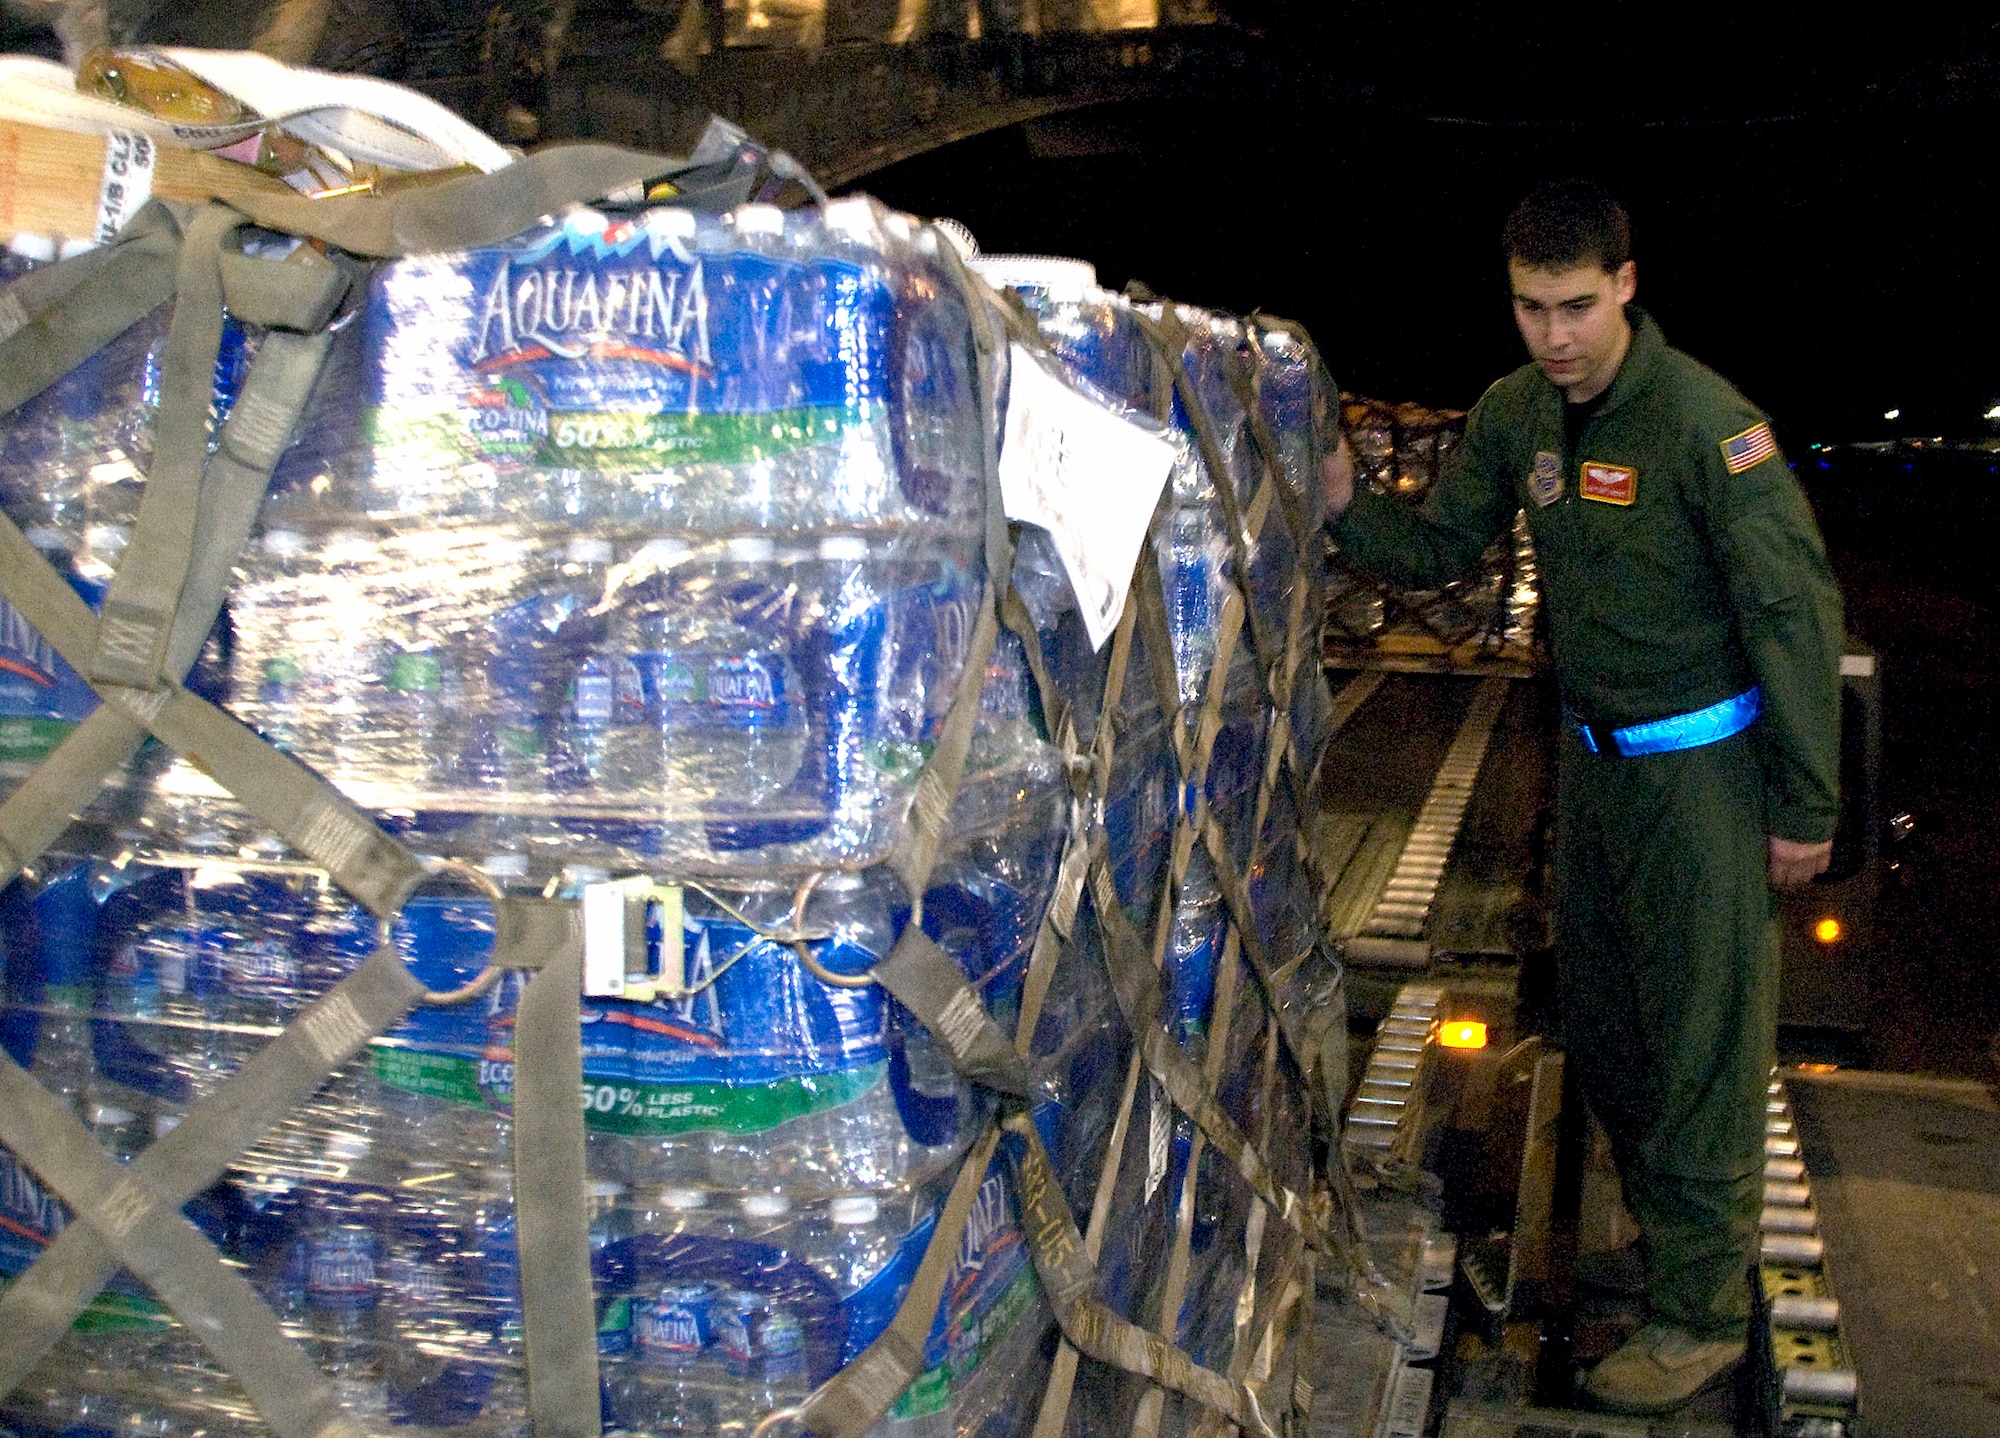 Senior Airman Anthony Jimenez prepares to push a pallet of bottled water on a McChord C-17 on the Charleston AFB flightline Jan. 18. The pallet contained more than 4,000 bottles of water and were shipped to Haiti as part of the humanitarian relief effort to aid victims of the recent earthquake. Airman Jimenez is a loadmaster with the 10th Airlift Squadron, McChord AFB, Wash. (U.S. Air Force photo/Staff Sgt. Daniel Bowles)